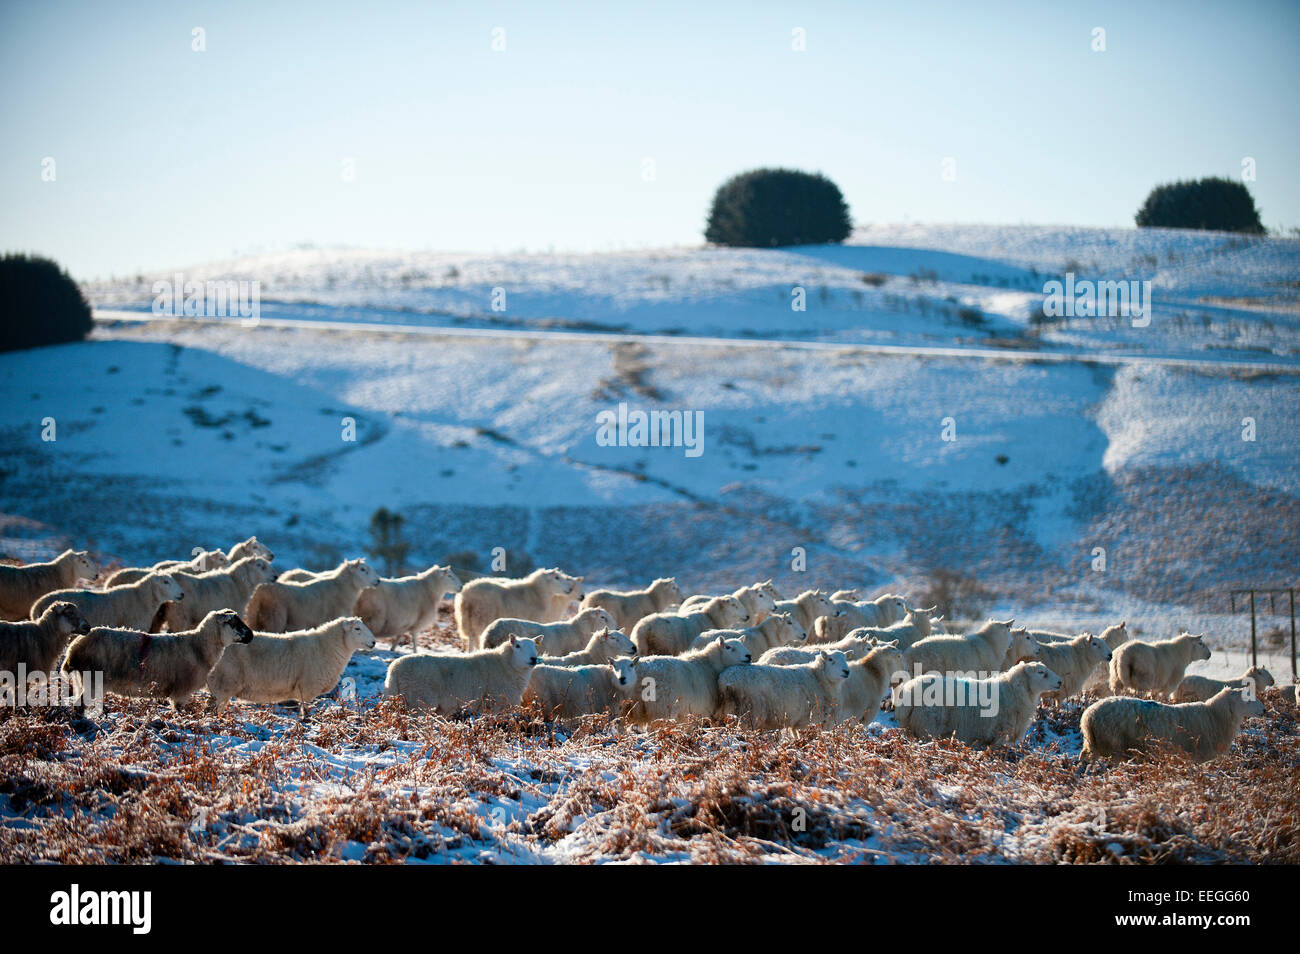 Mynydd Epynt, Powys, UK. 18th January, 2015. Sheep wait for the farmer to bring food on the high moorland of the Mynydd Epynt in Powys, Wales, UK. Mid Wales wakes up to Sub zero temperatures and a beautiful blue sky. Credit:  Graham M. Lawrence/Alamy Live News. Stock Photo